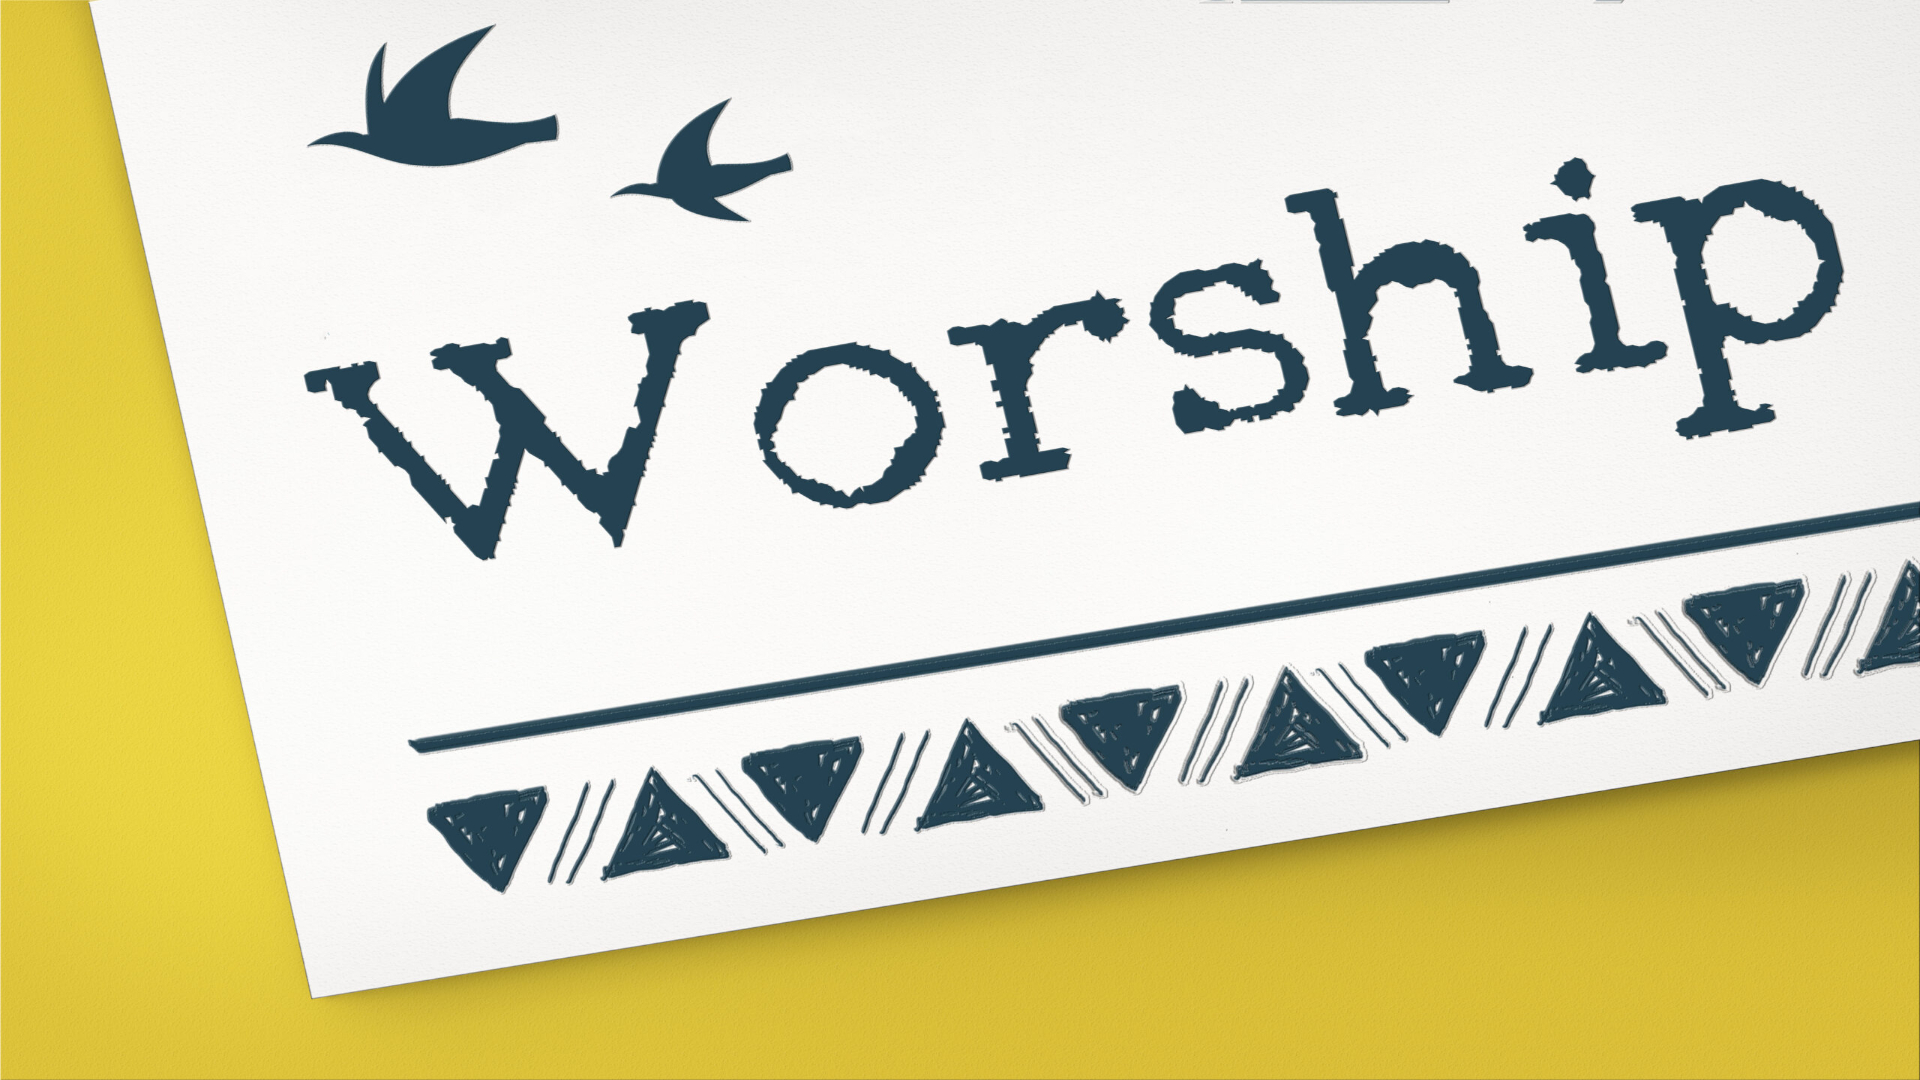 Worship: To Shout and Sing